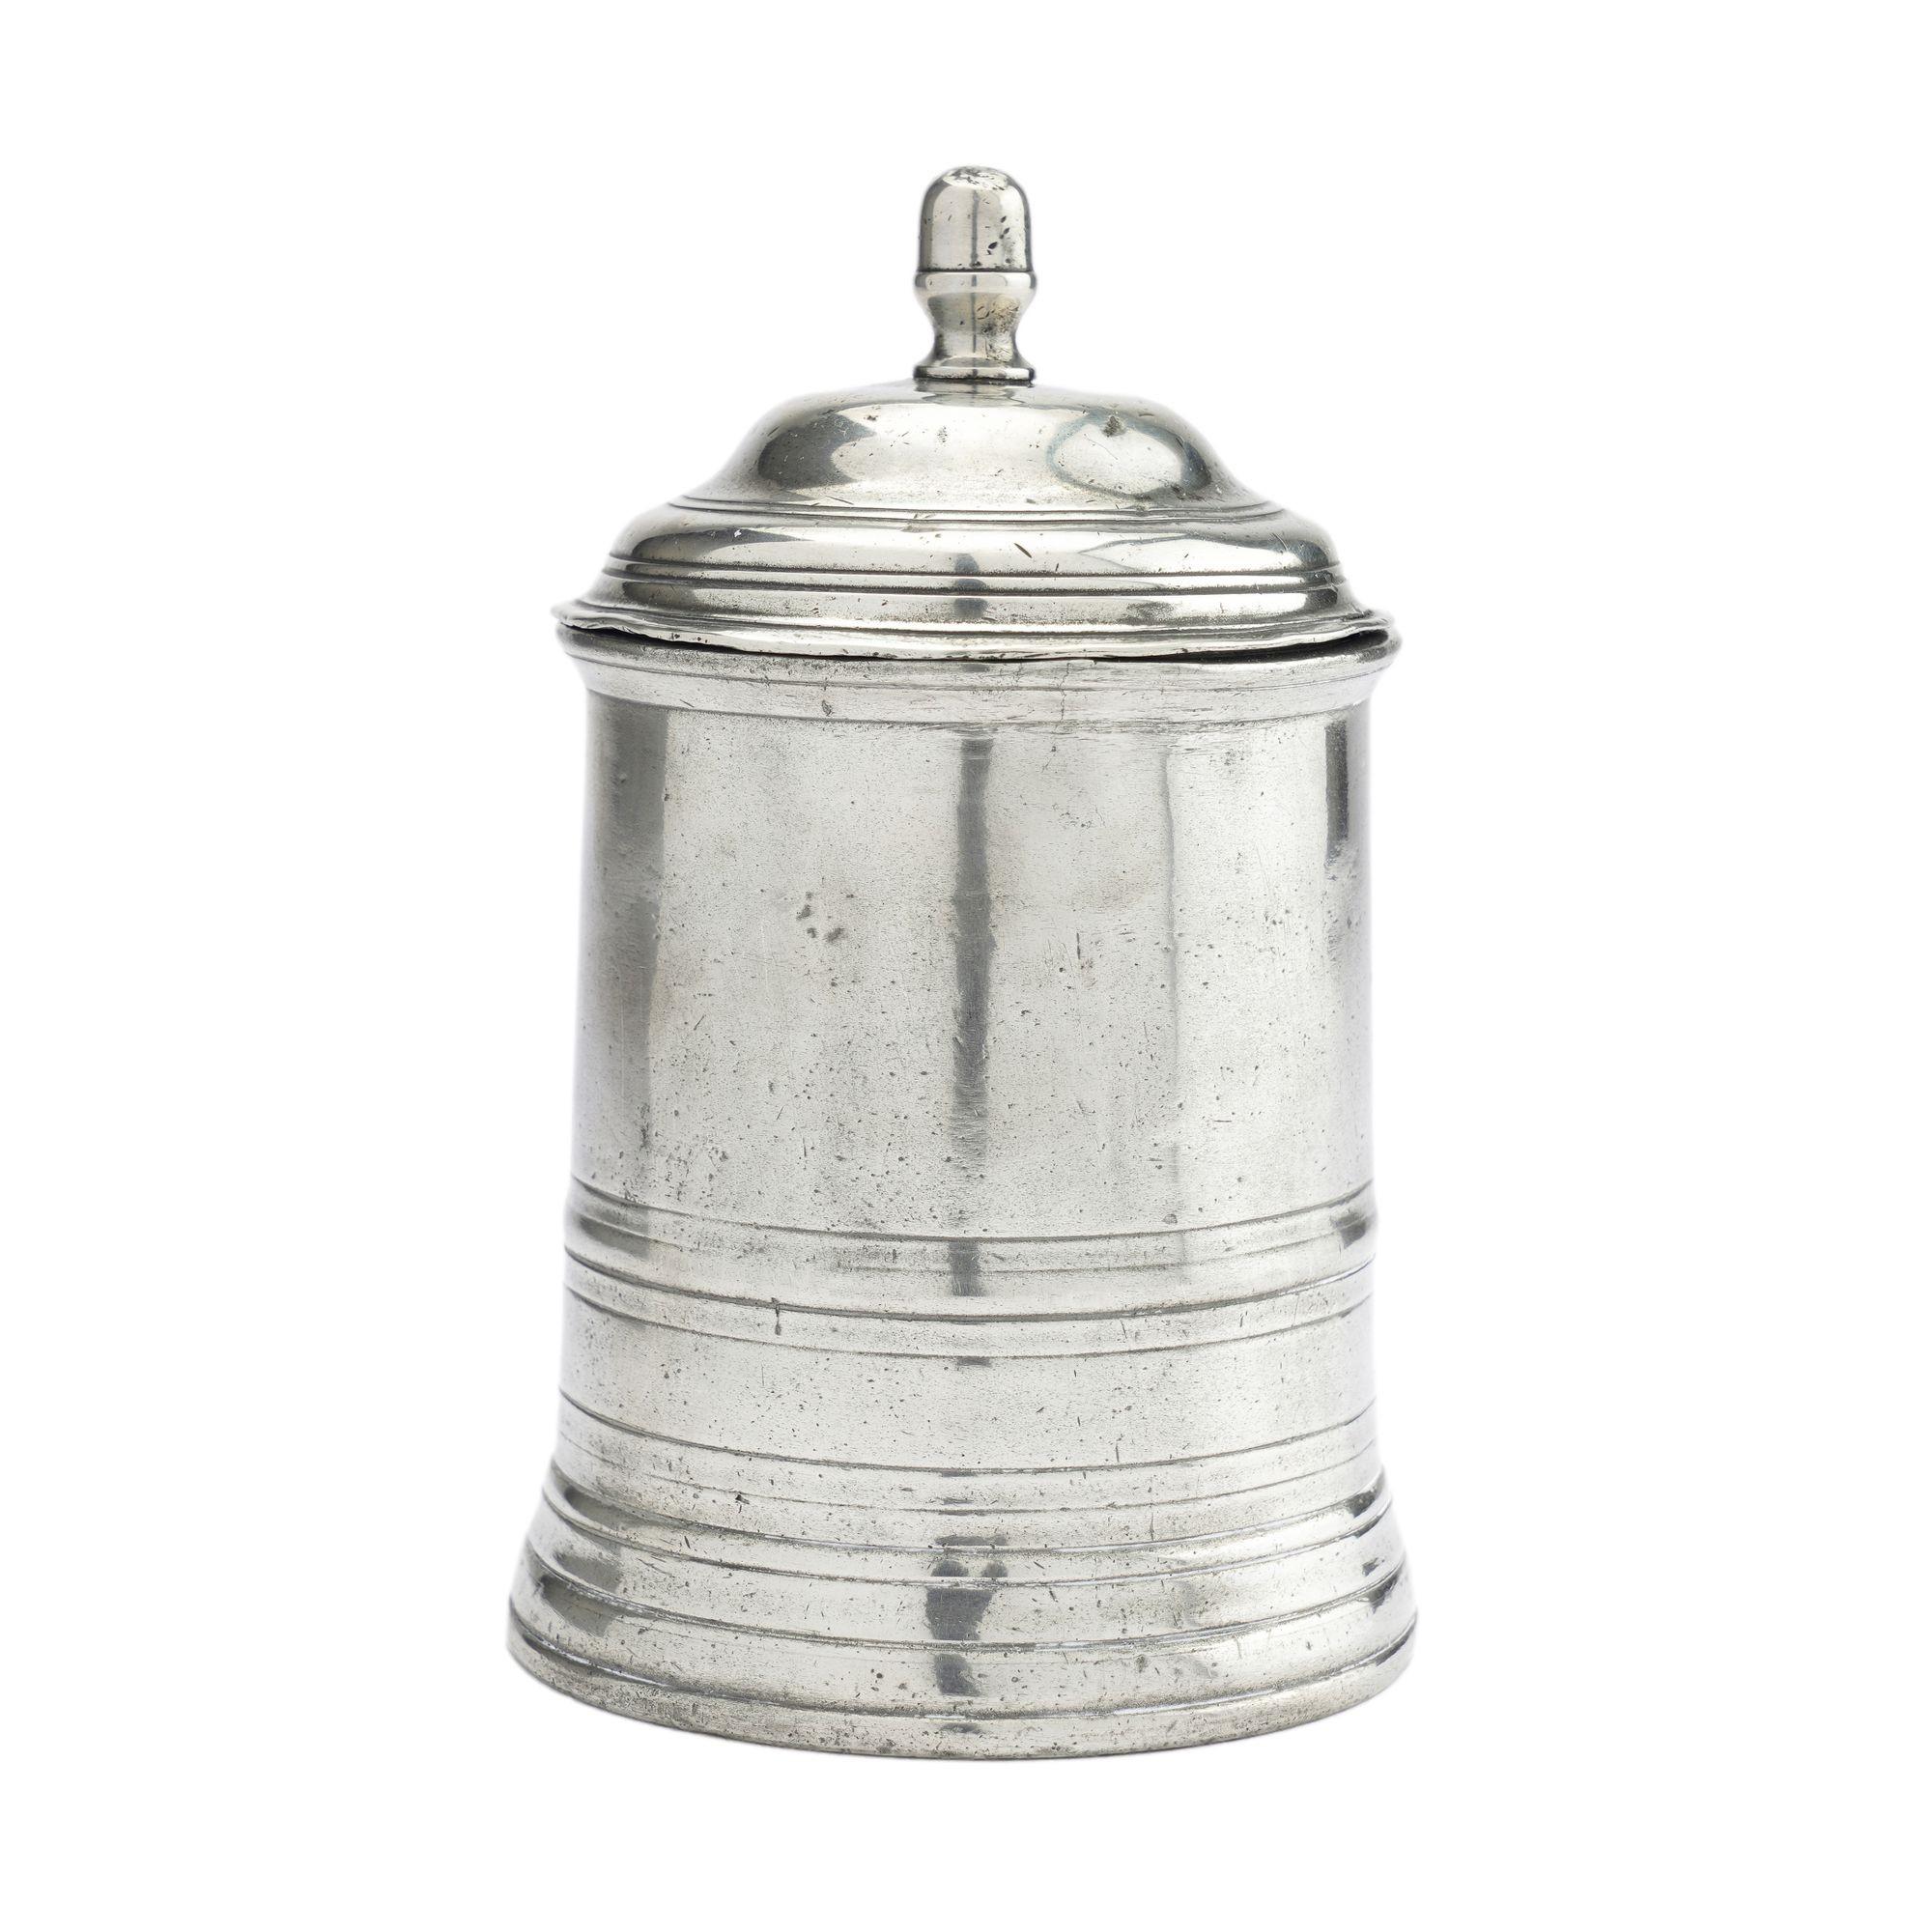 A rare George III pewter tea/tobacco canister. The beaded lip is repeated in ring moldings on the domed lid which terminates in an acorn finial. The canted base of the canister repeats the series of ring turned moldings. Engraved Palmer script